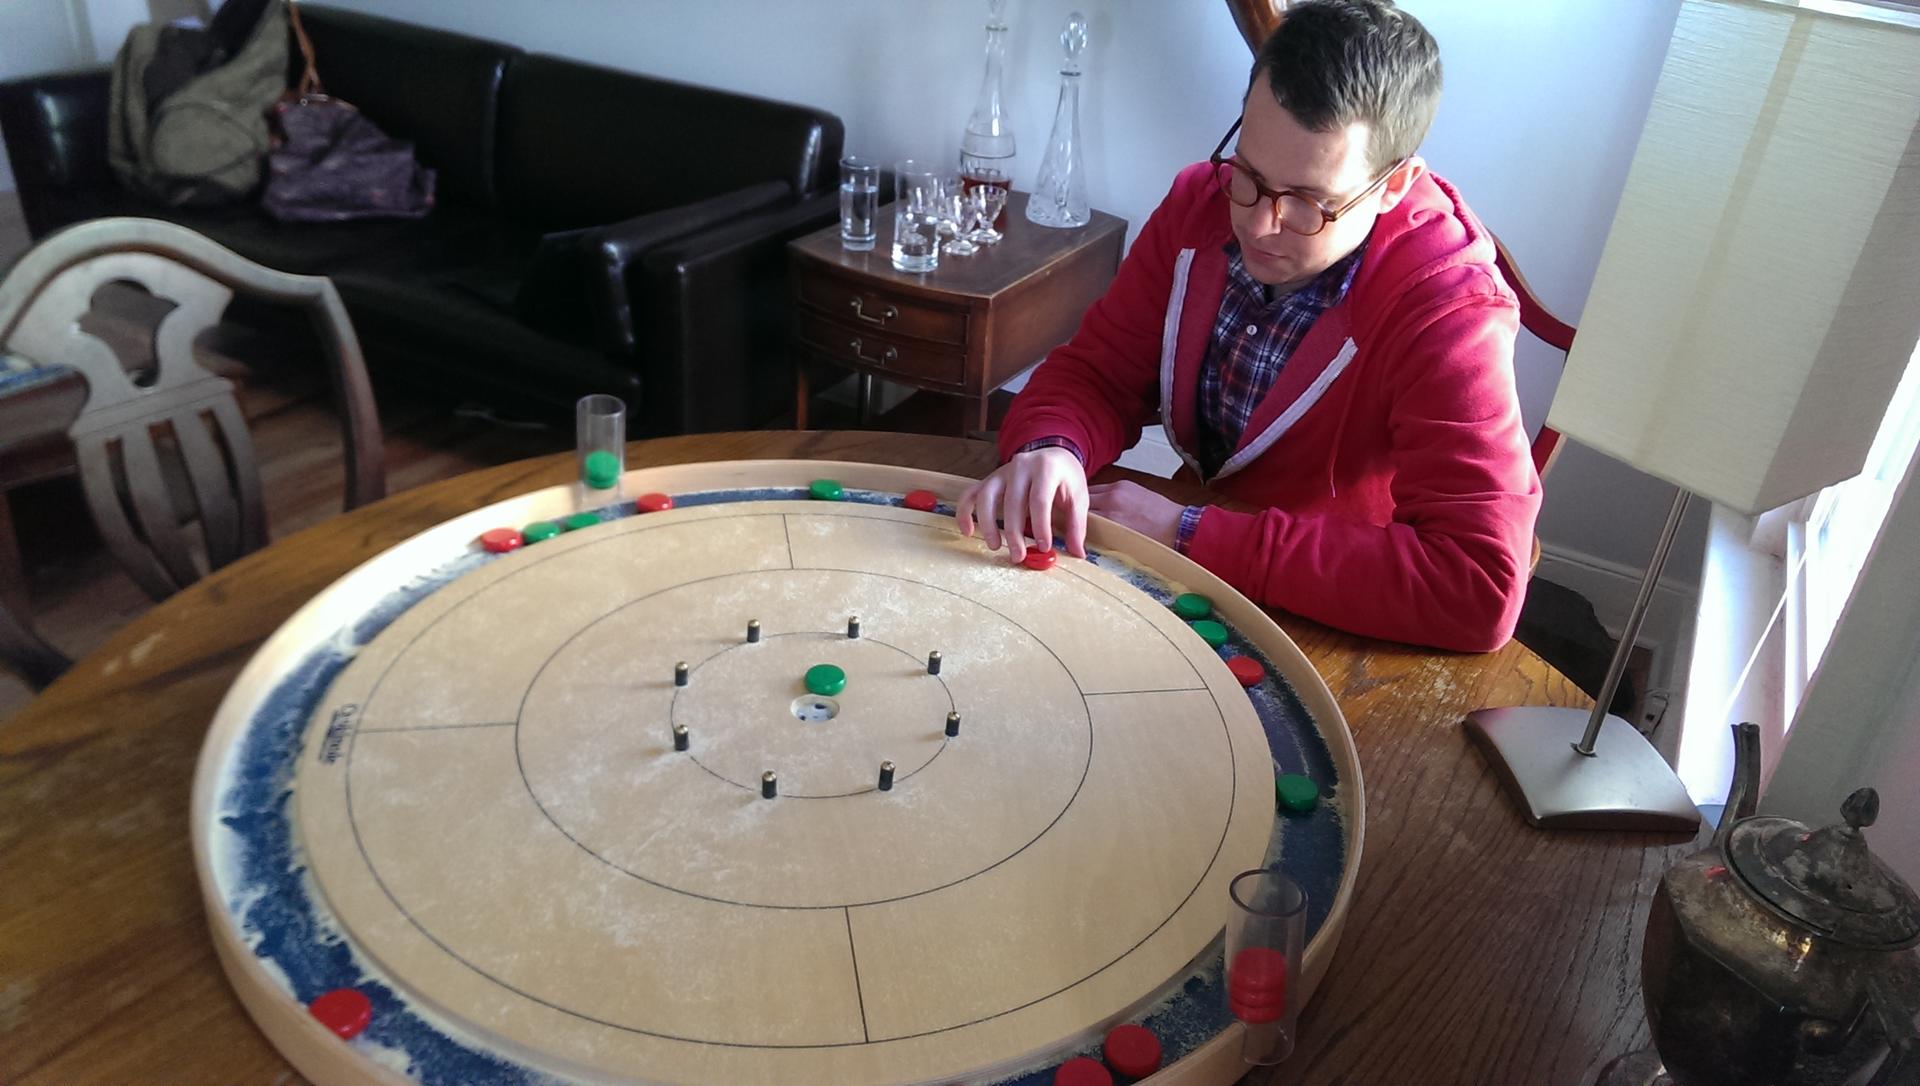 Scott Philipps and his roommate own three Crokinole boards. Each board is over two feet in diameter and takes up a tabletop. The one pictured here is a "regulation" board used for tournament play.